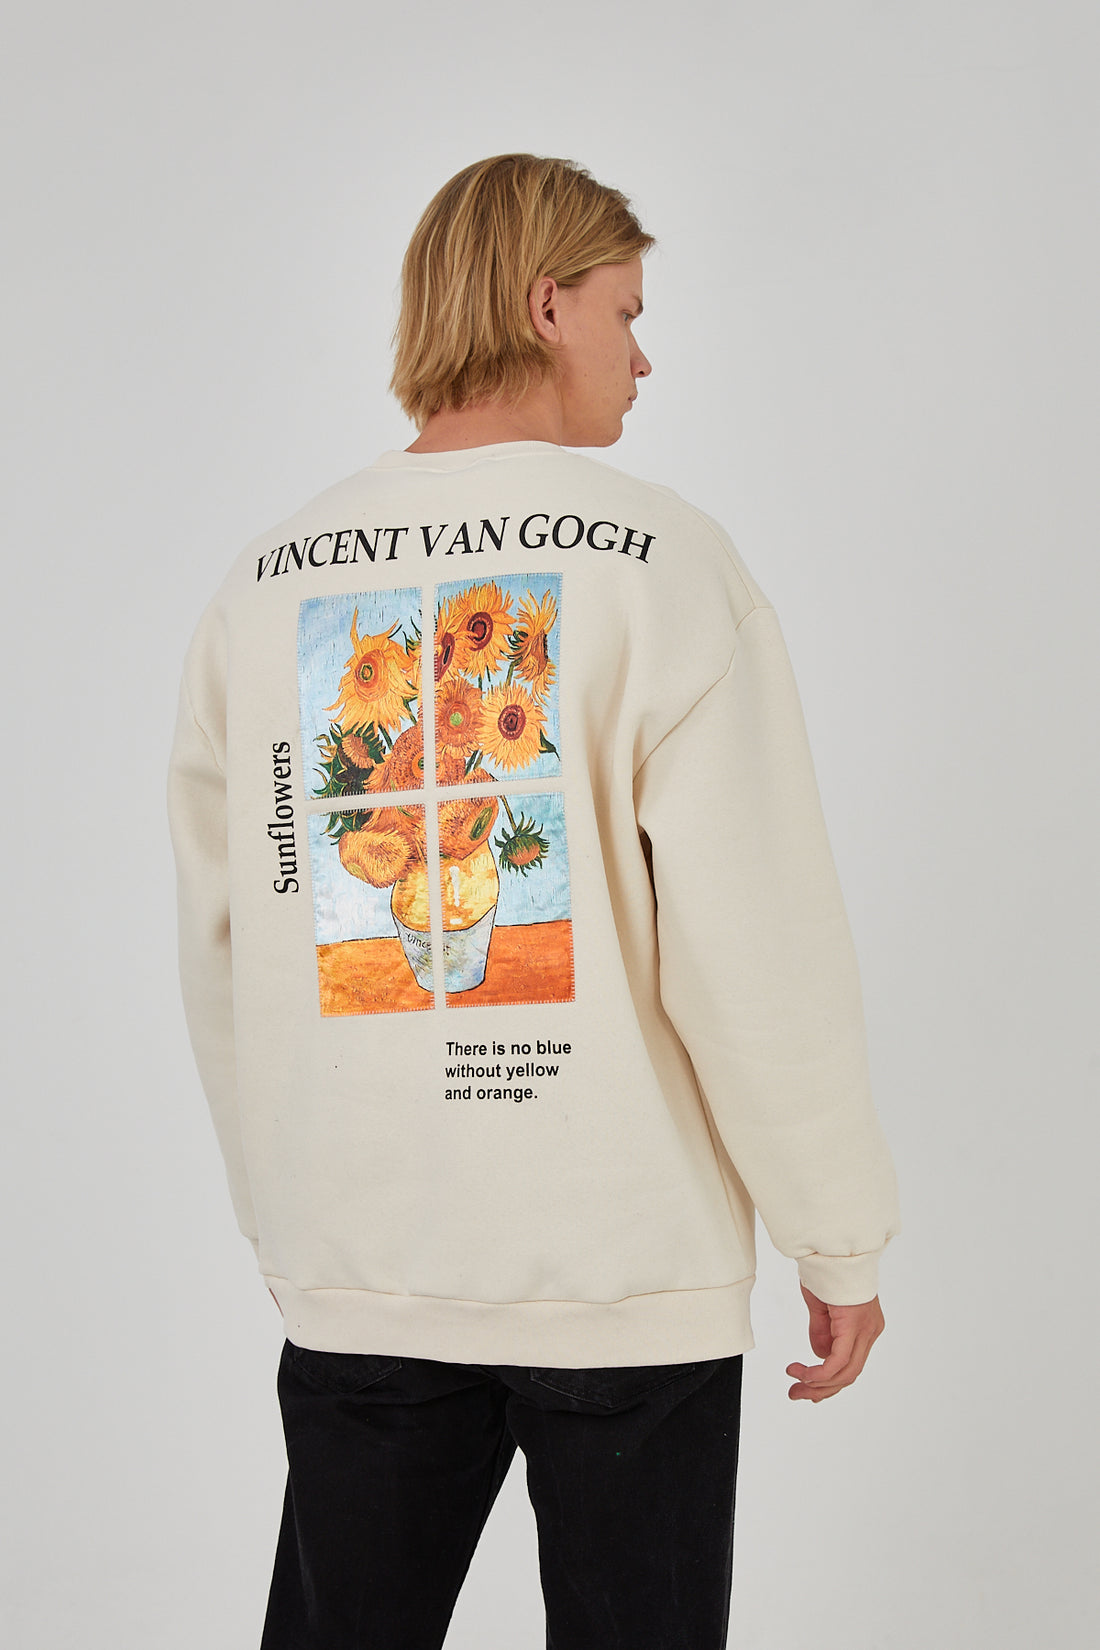 SWEATER - SUNFLOWERS - OFF WHITE - DYS-Amsterdam